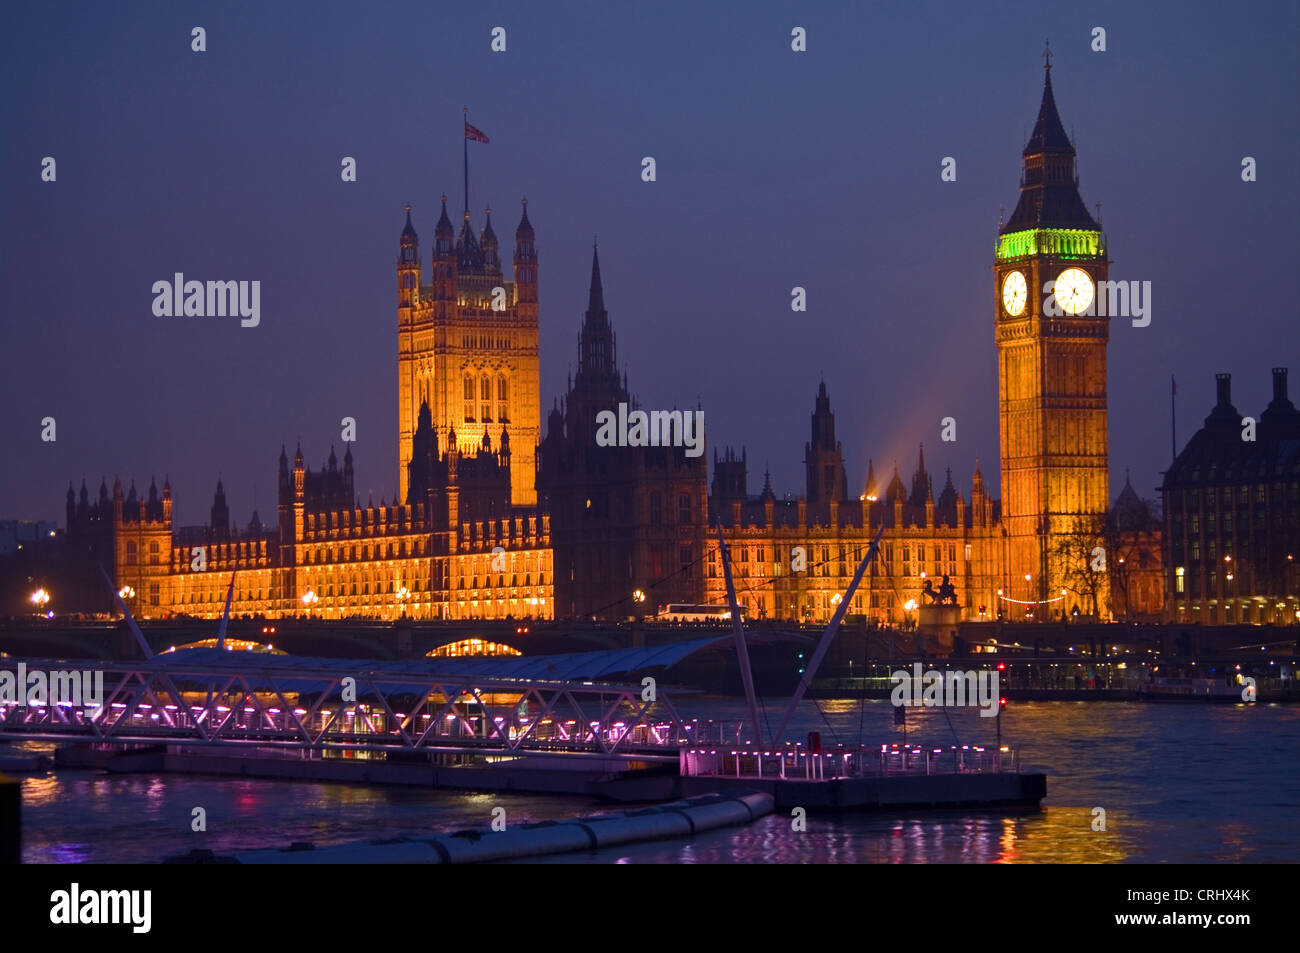 Houses Of Parliament Big Ben London Eye Pier Westminster Bridge Floodlit At Night Seen Over River Thames From South Bank Stock Photo Alamy